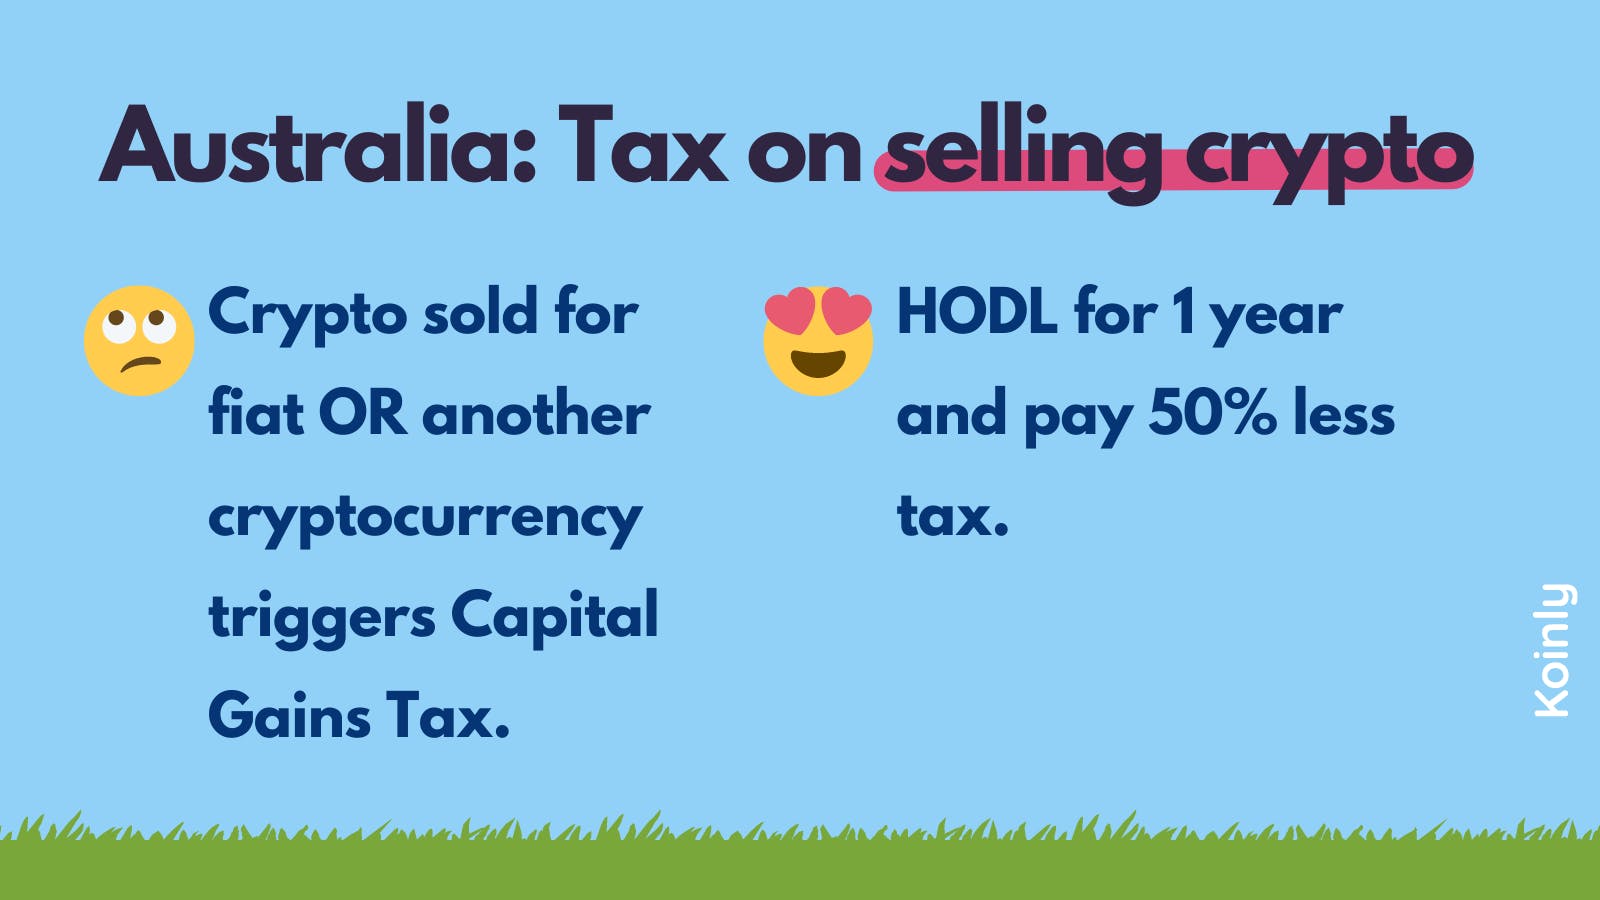 Tax on selling crypto in Australia